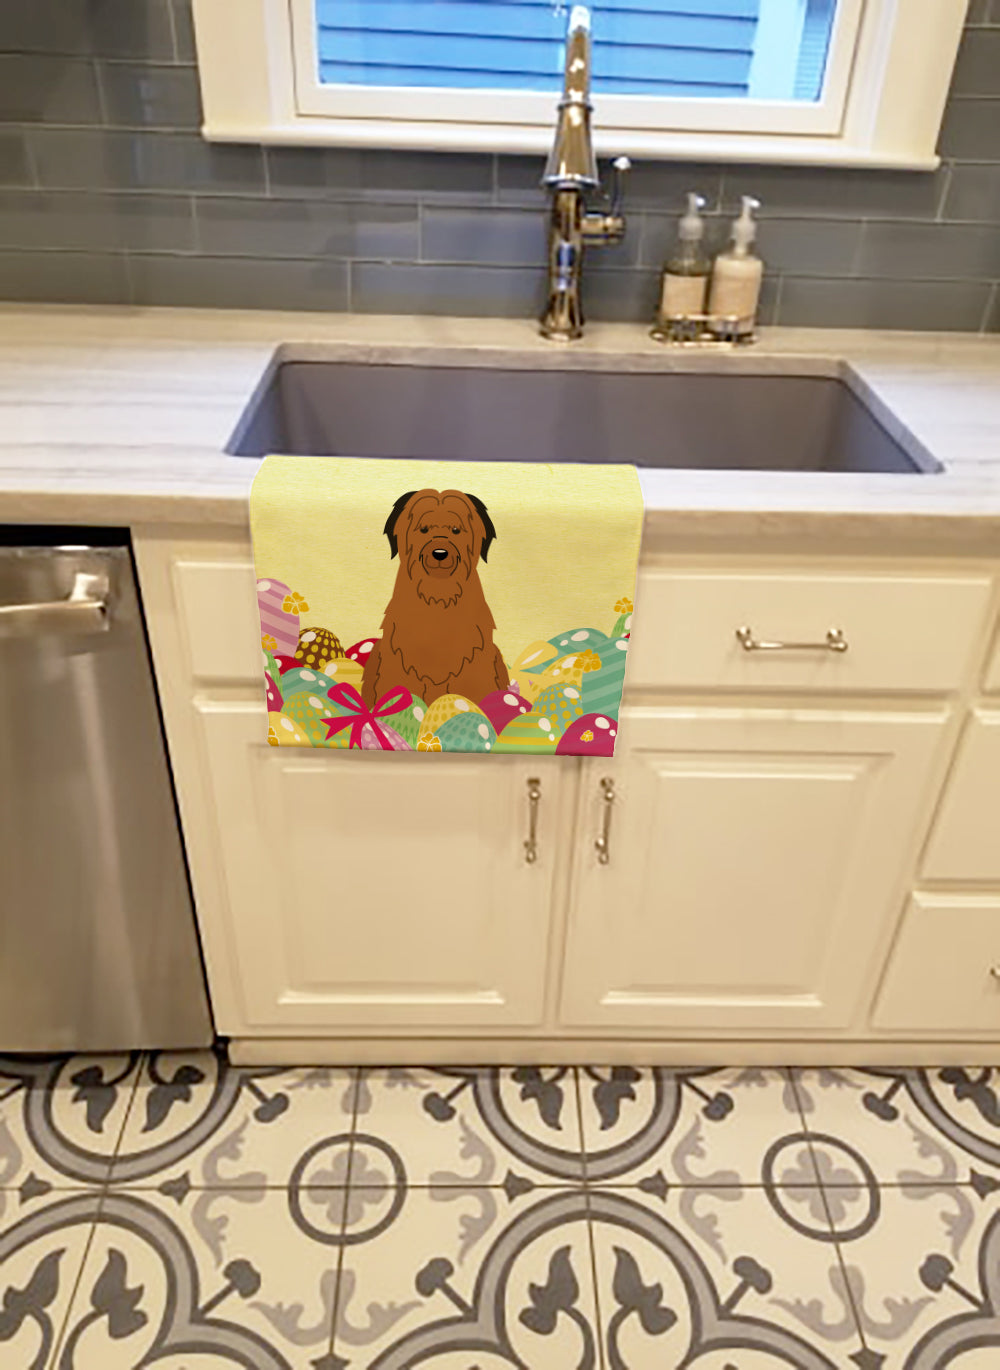 Easter Eggs Briard Brown Kitchen Towel BB6082KTWL - the-store.com